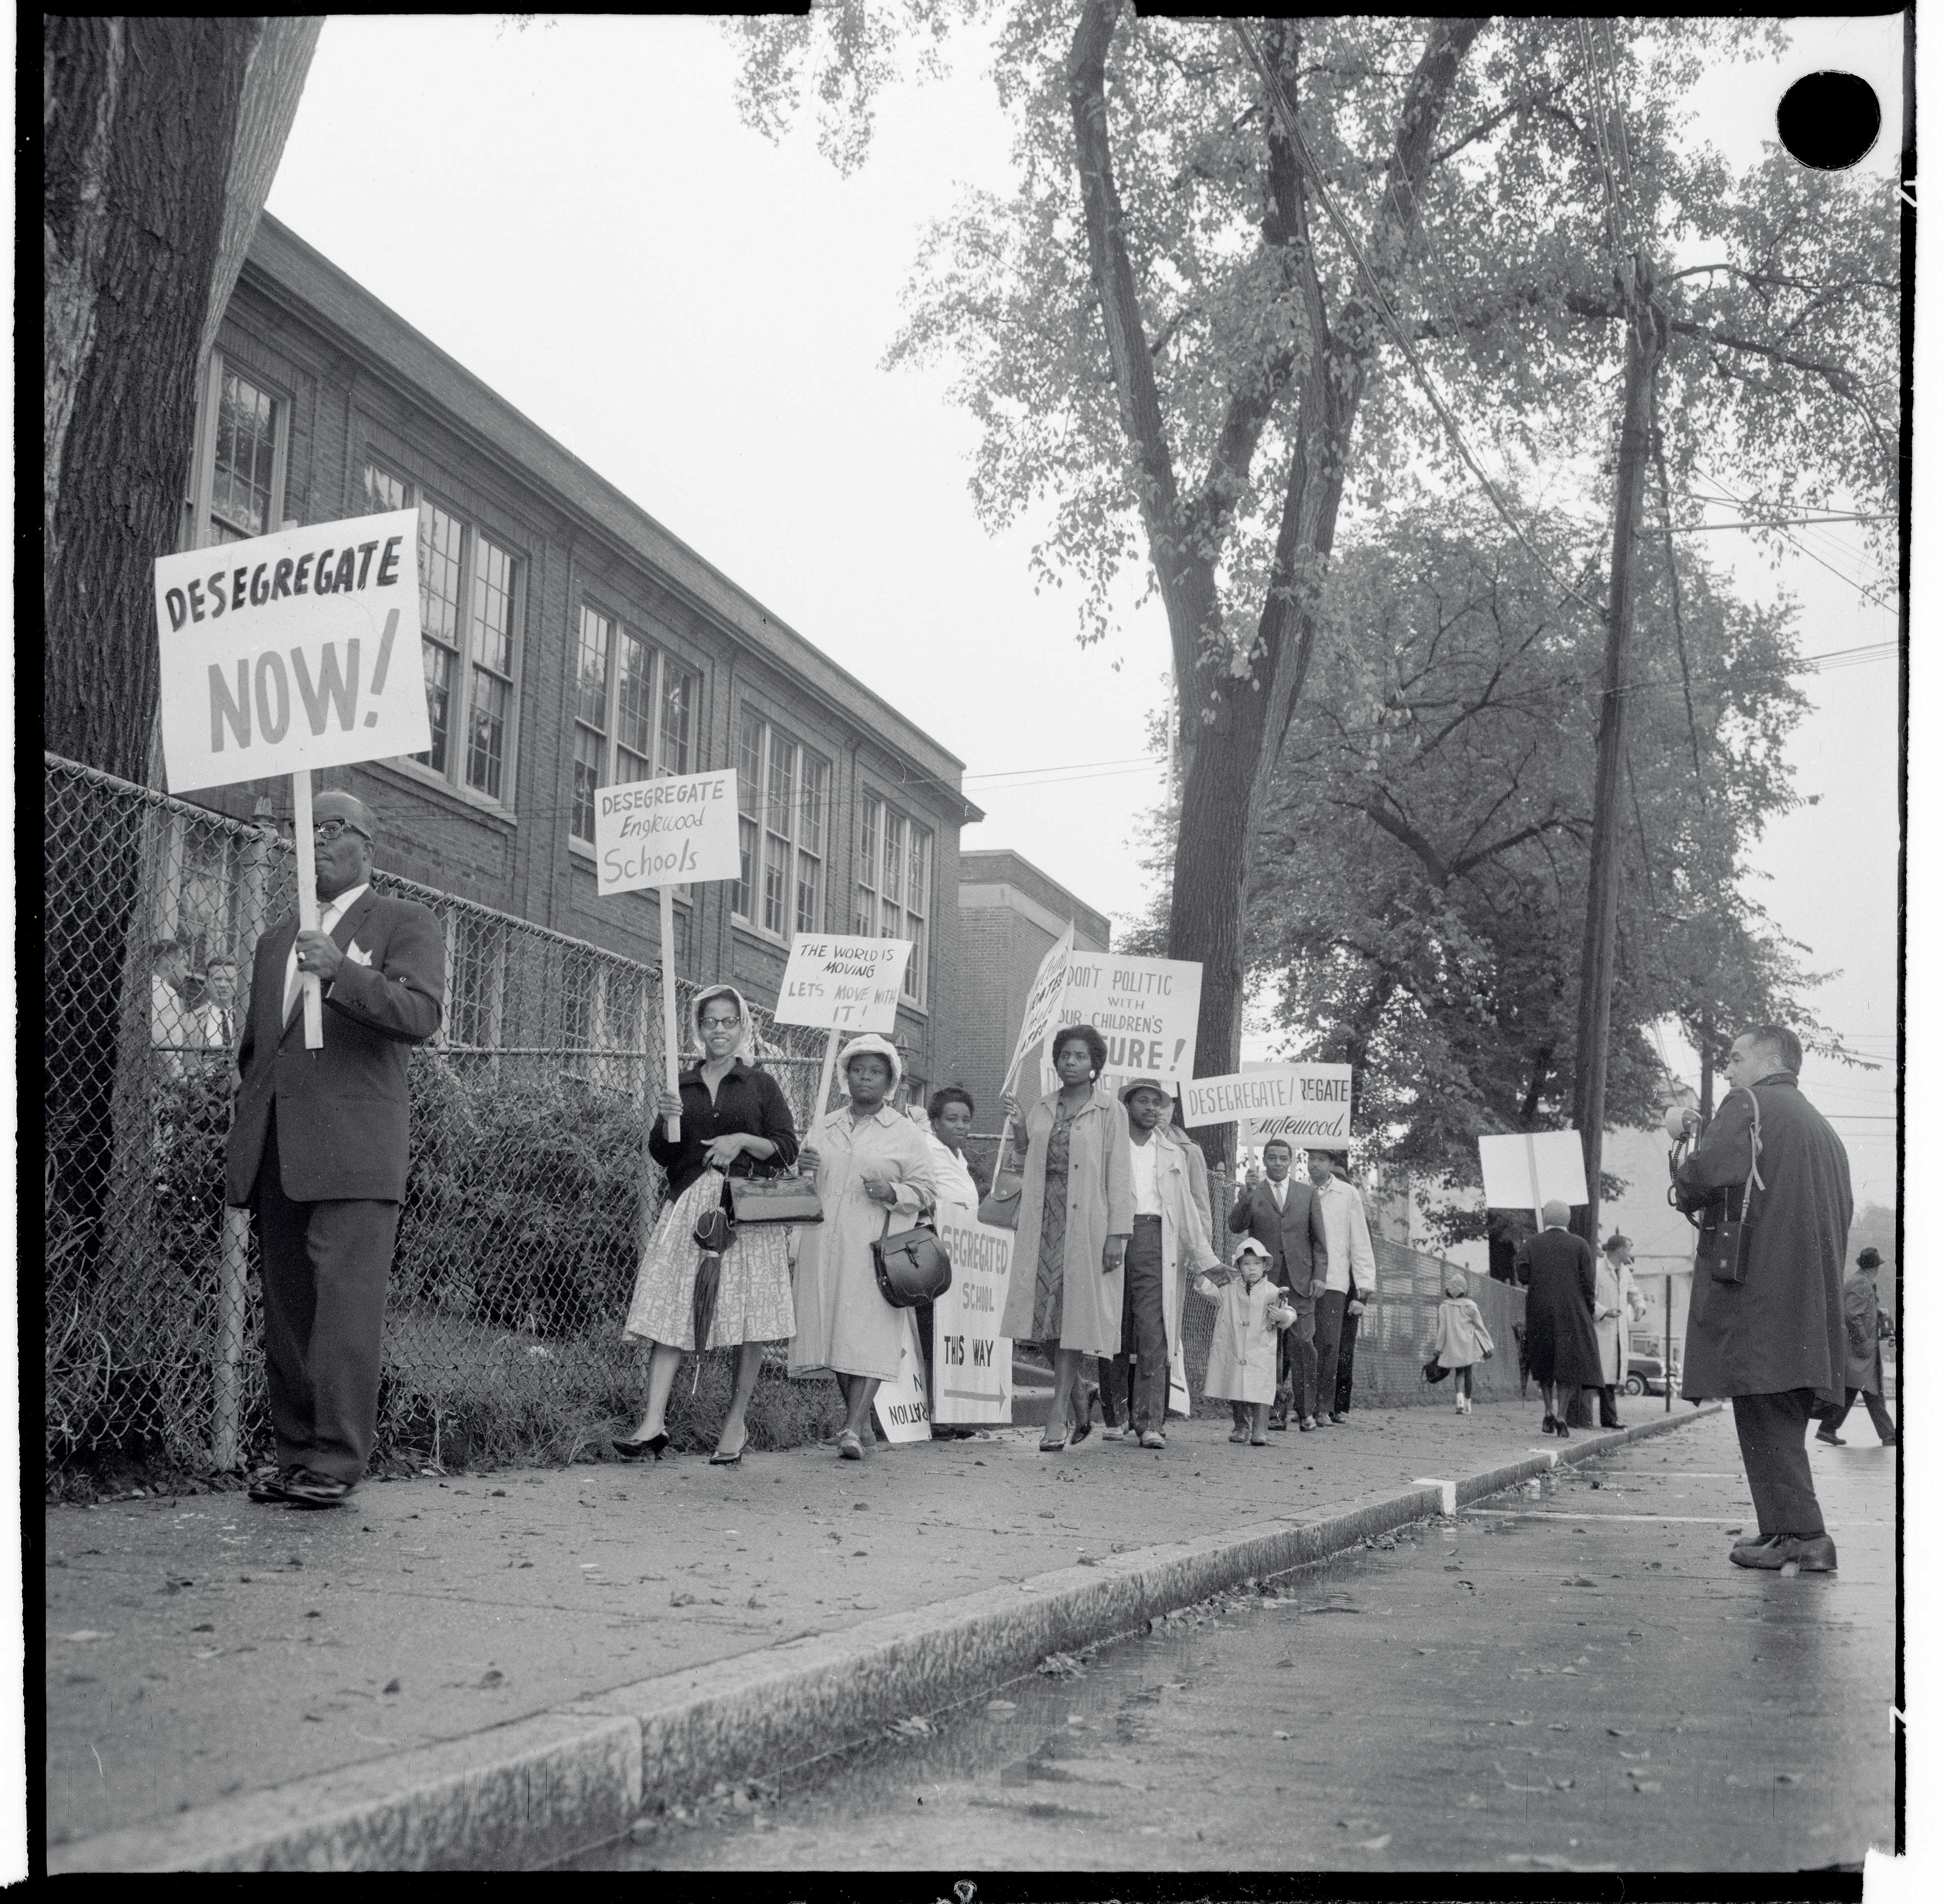 Black and white photograph of people protesting holding signs that say "Desegregate Now".